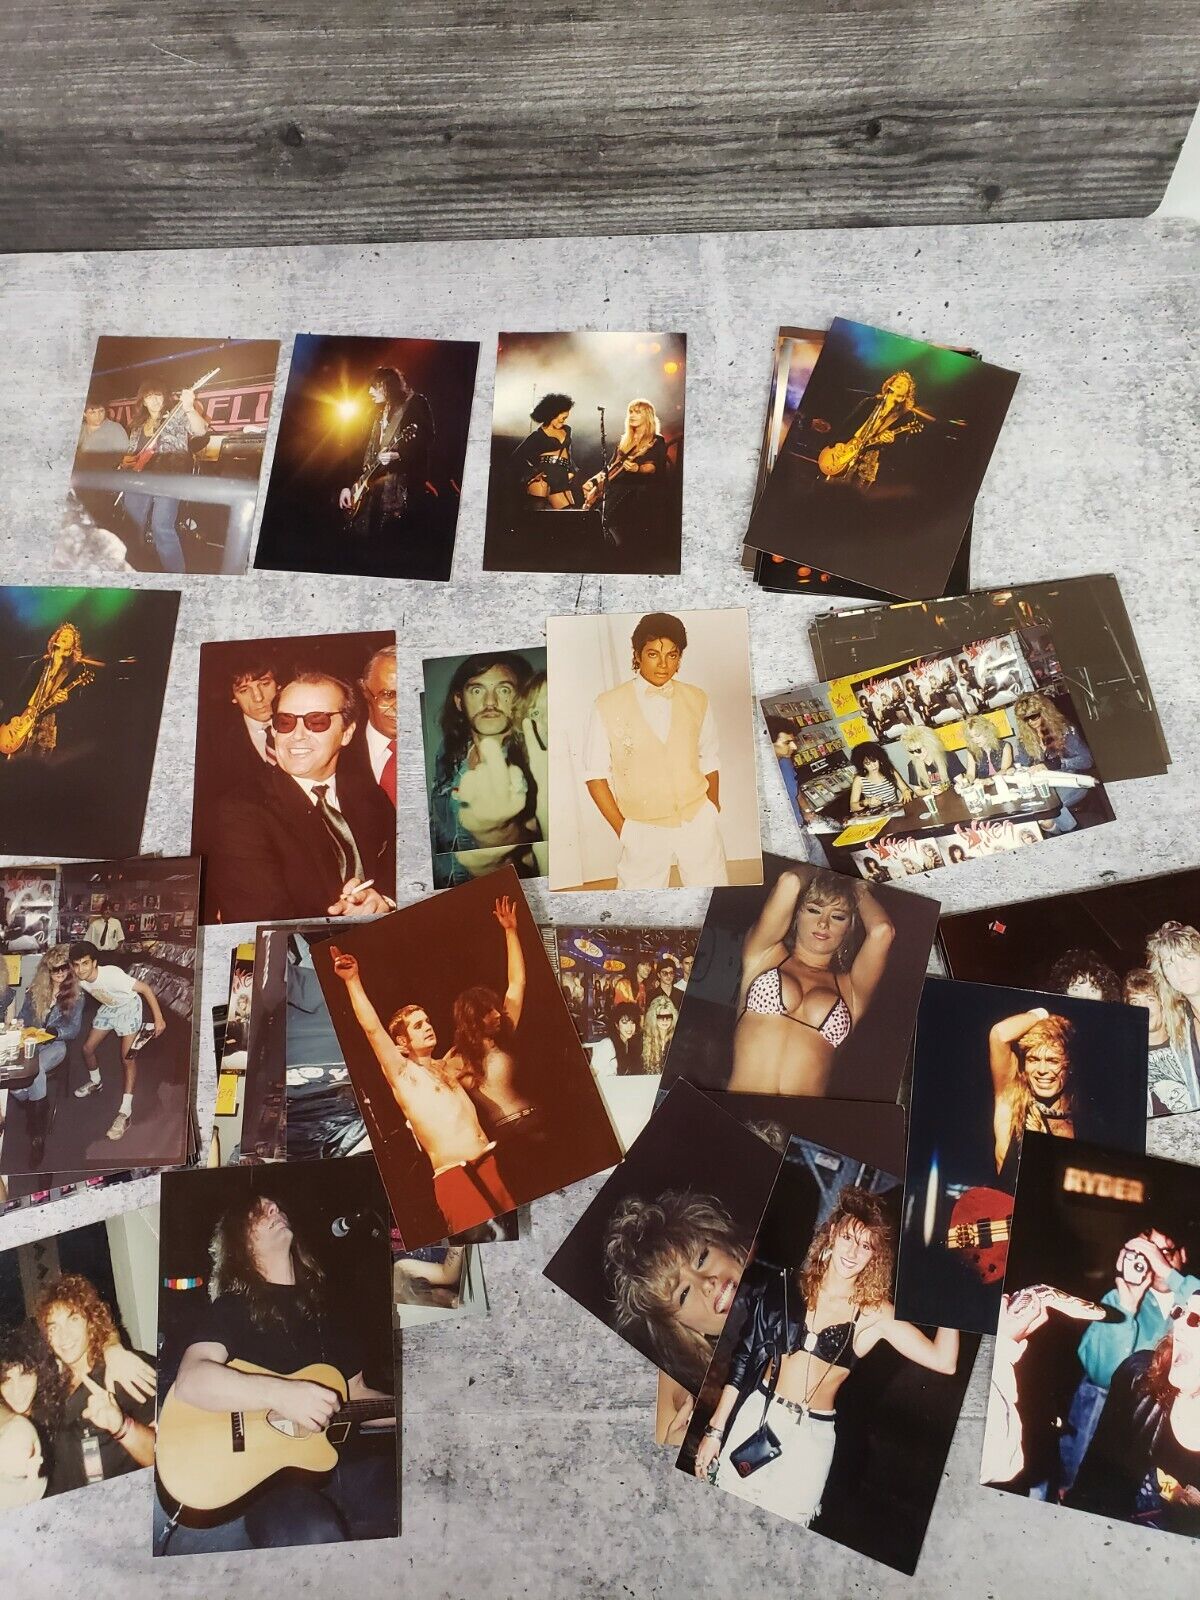 Over 600 Rock Music Photos Collection Anthrax Bon Jovi Springsteen + Many More